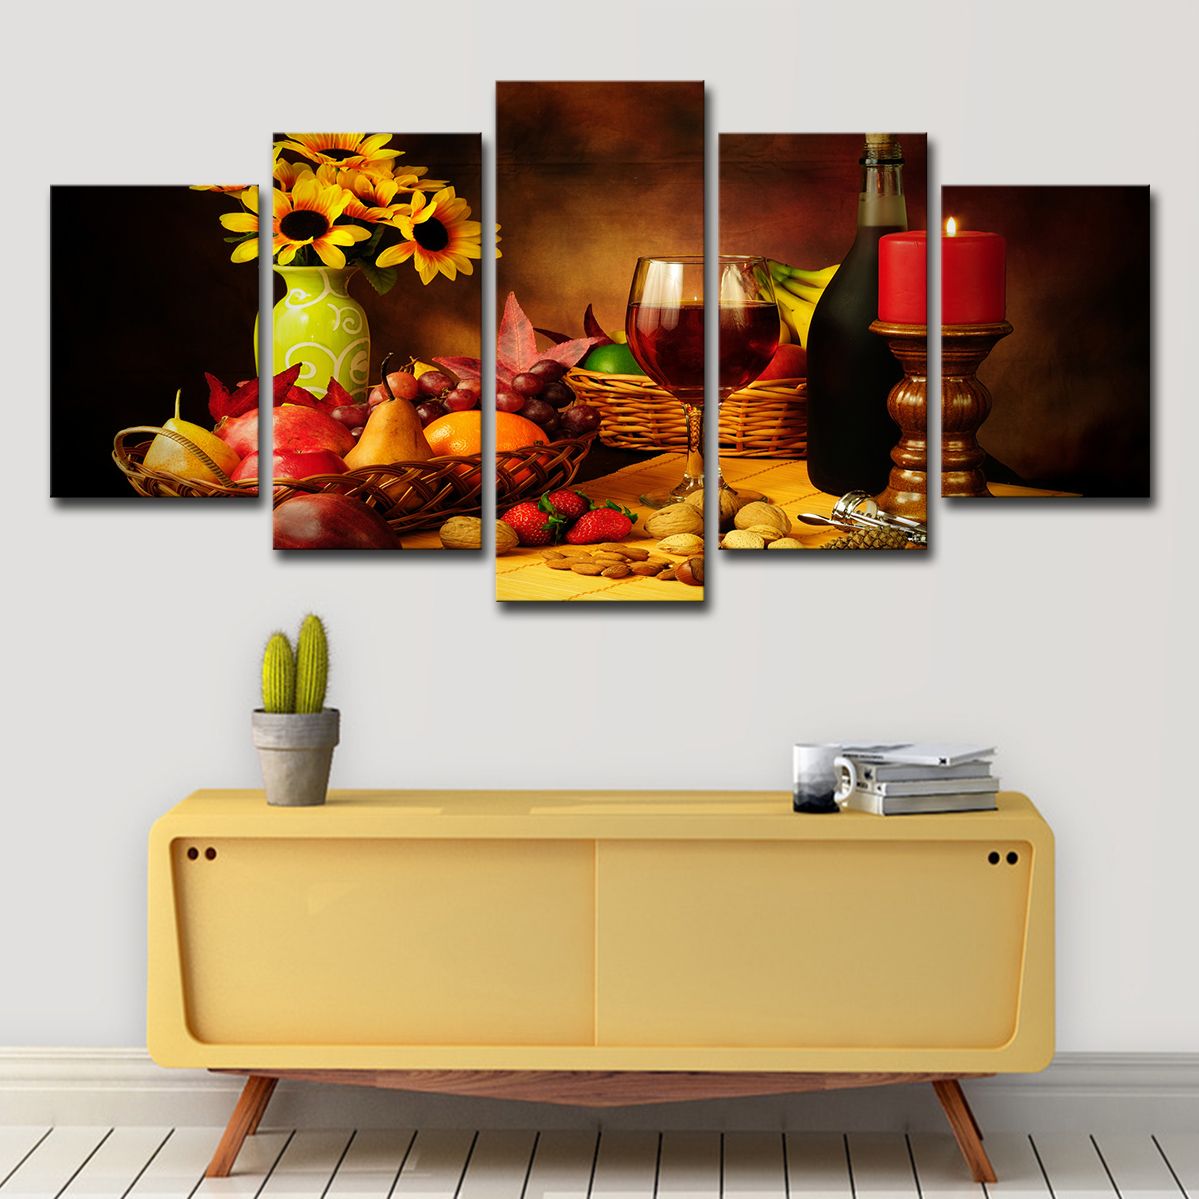 2020 Canvas Pictures Wall Art Hd Prints Poster Fruit And Food Wine Glass Paintings Kitchen Restaurant Home Decor From Print Art Canvas 13 95 Dhgate Com